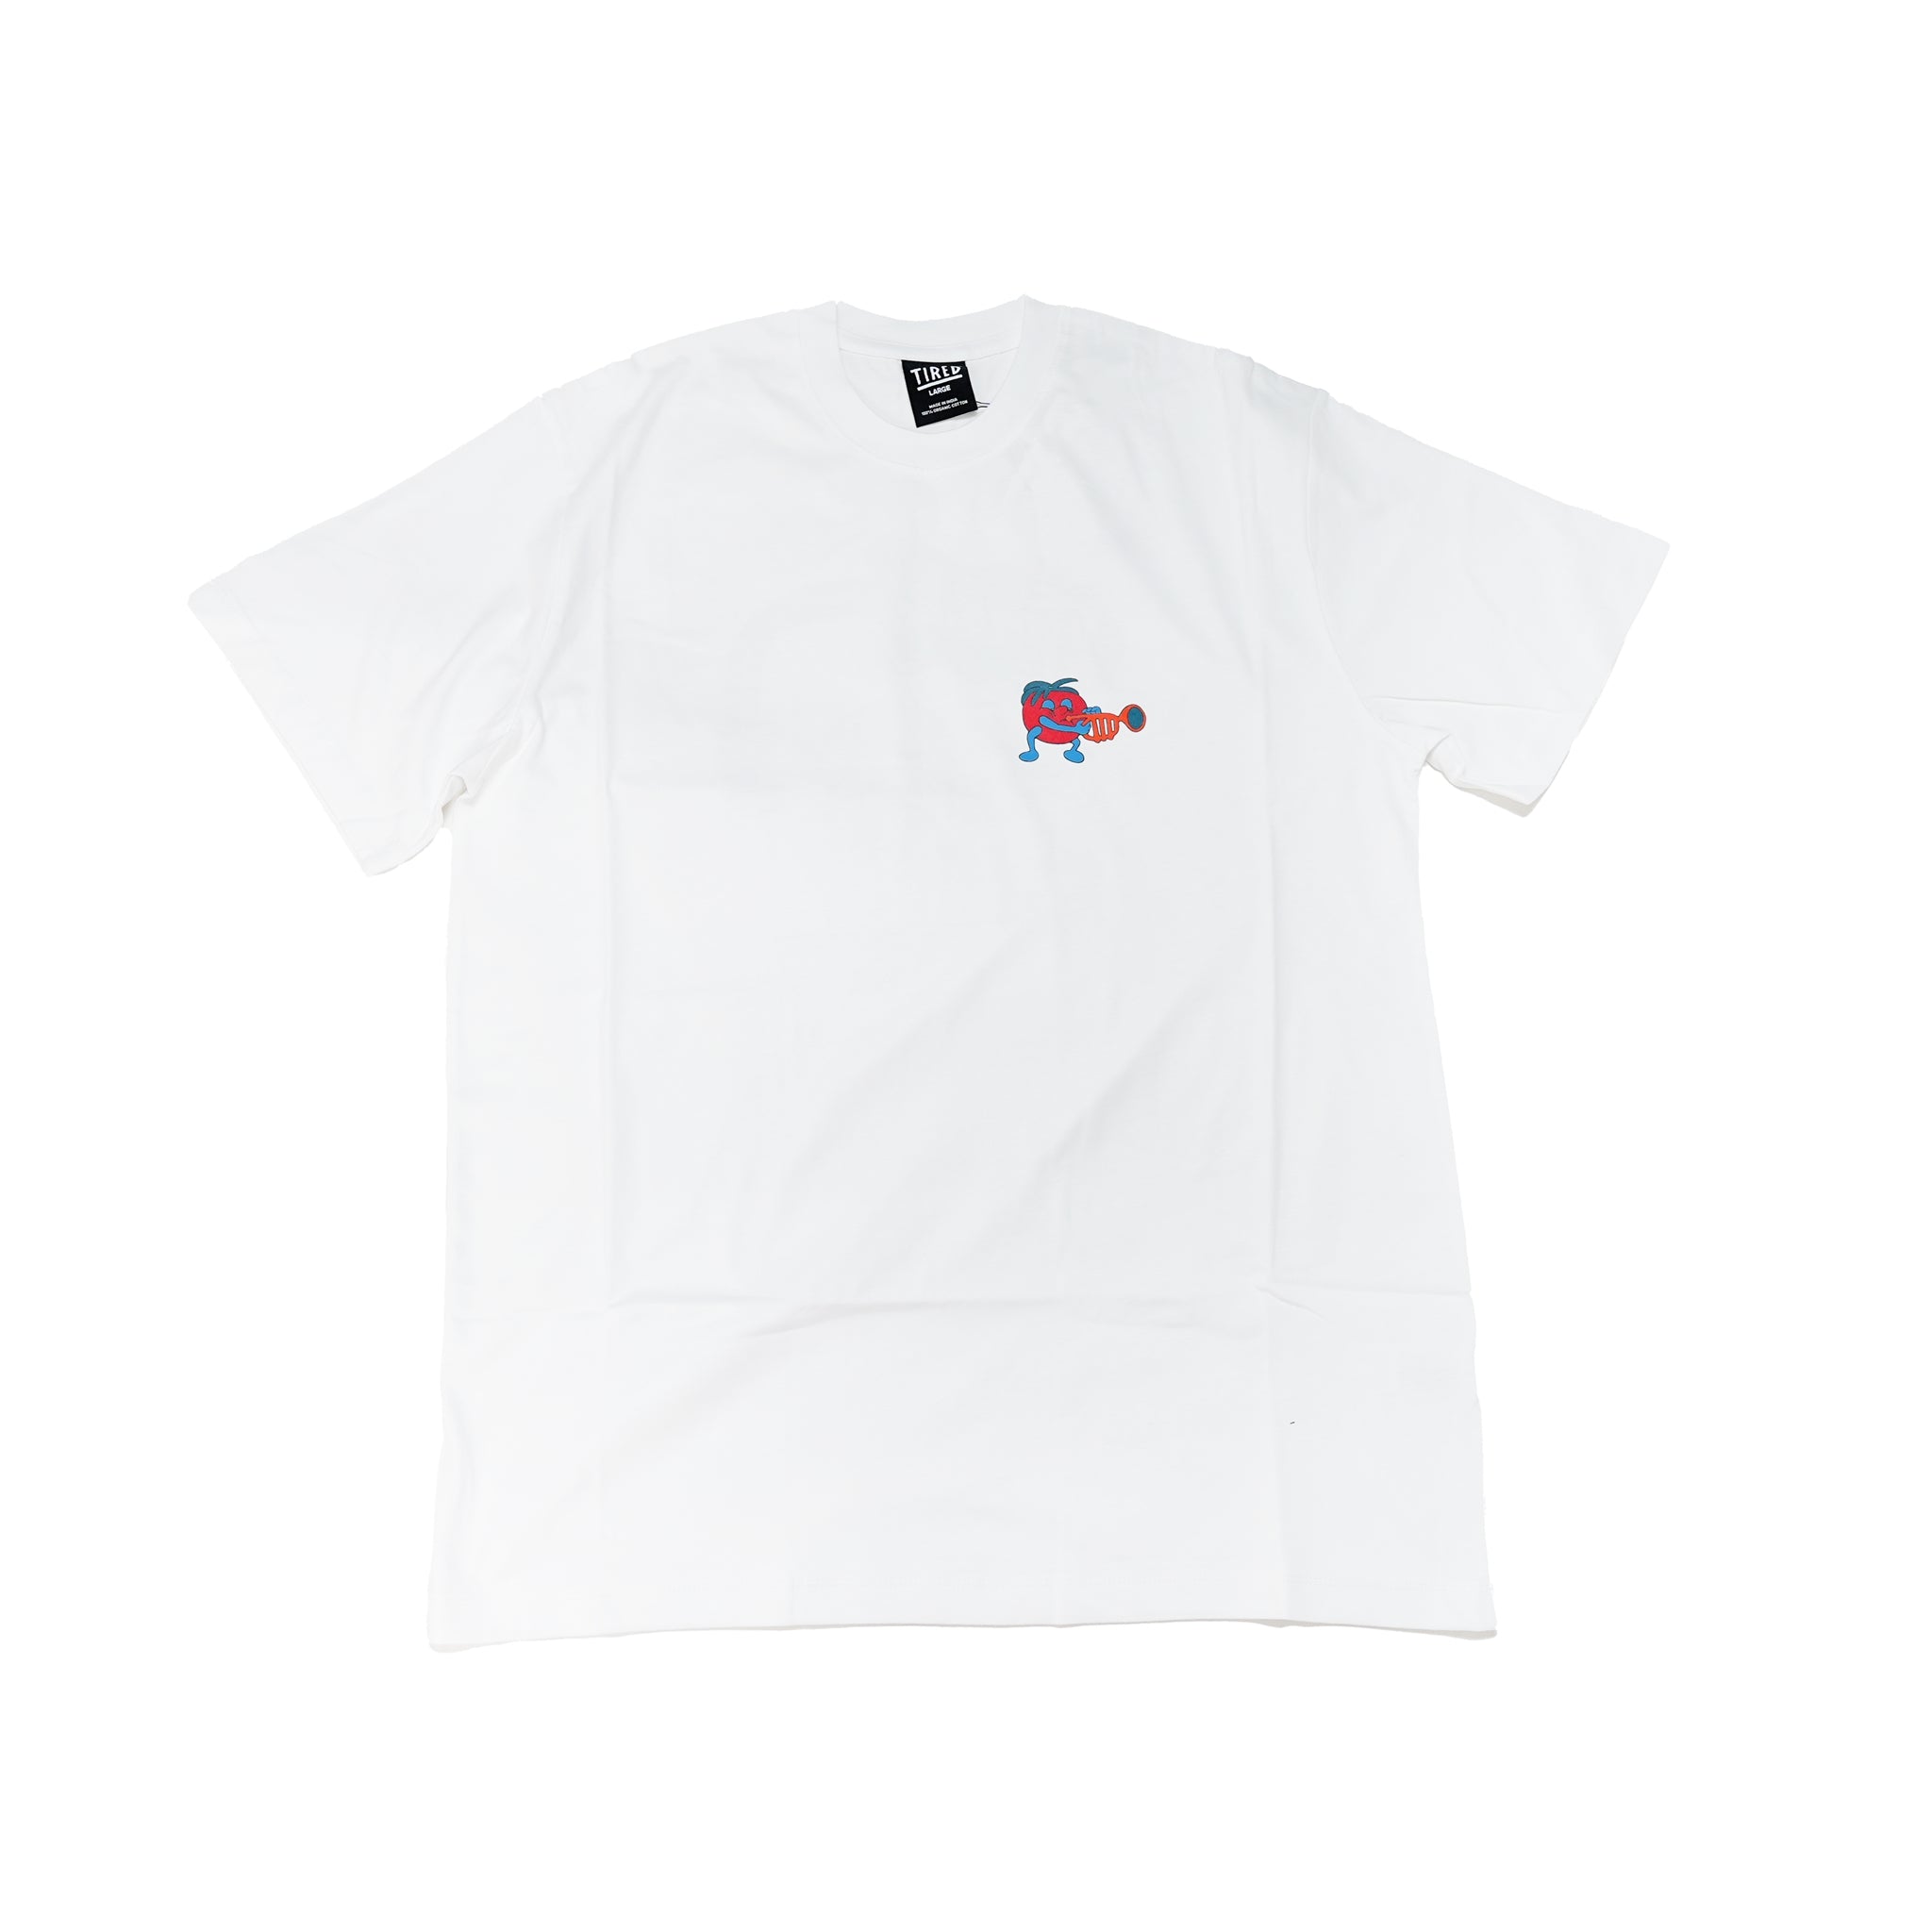 No:TS00254 | Name:MUSIC SS TEE (ORGANIC) | Color:White【TIRED_タイレッド】